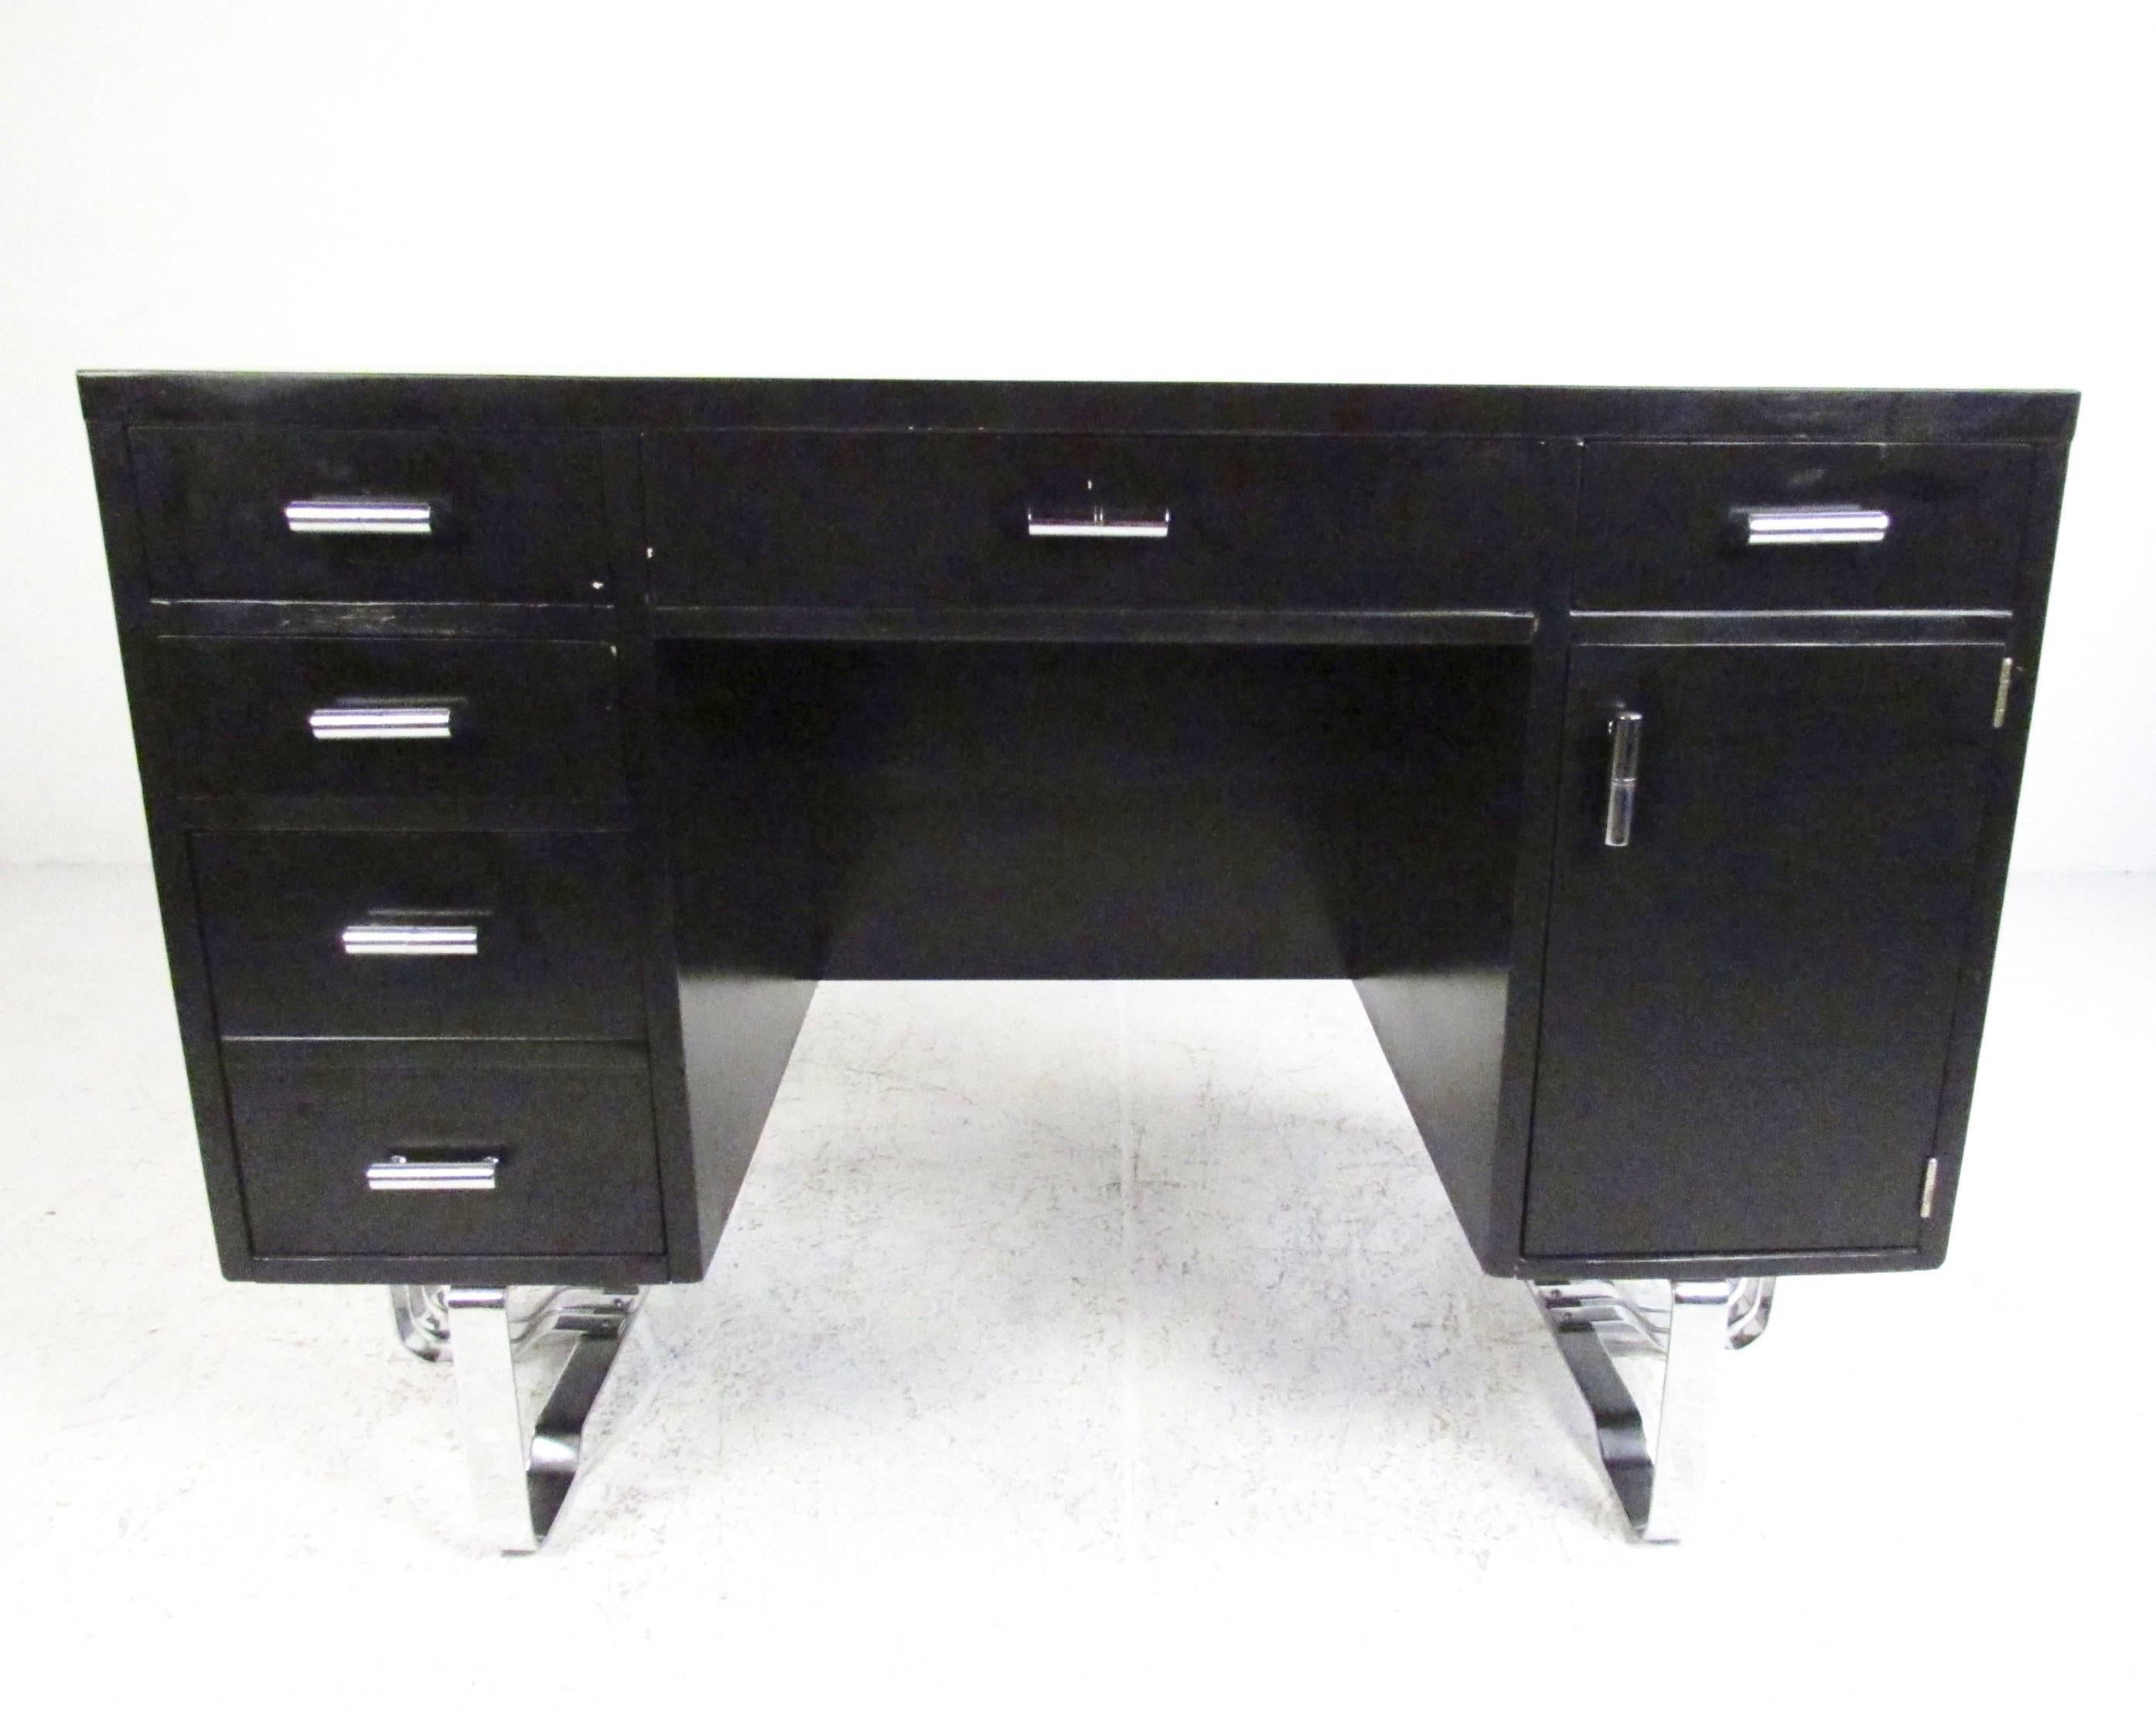 This stylish black lacquer writing desk features the unique vintage design of Mid-Century Modern designer Wolfgang Hoffman. Spacious drawers with tubular chrome handles, sculptural metal base, and clean modern lines make this an eye-catching